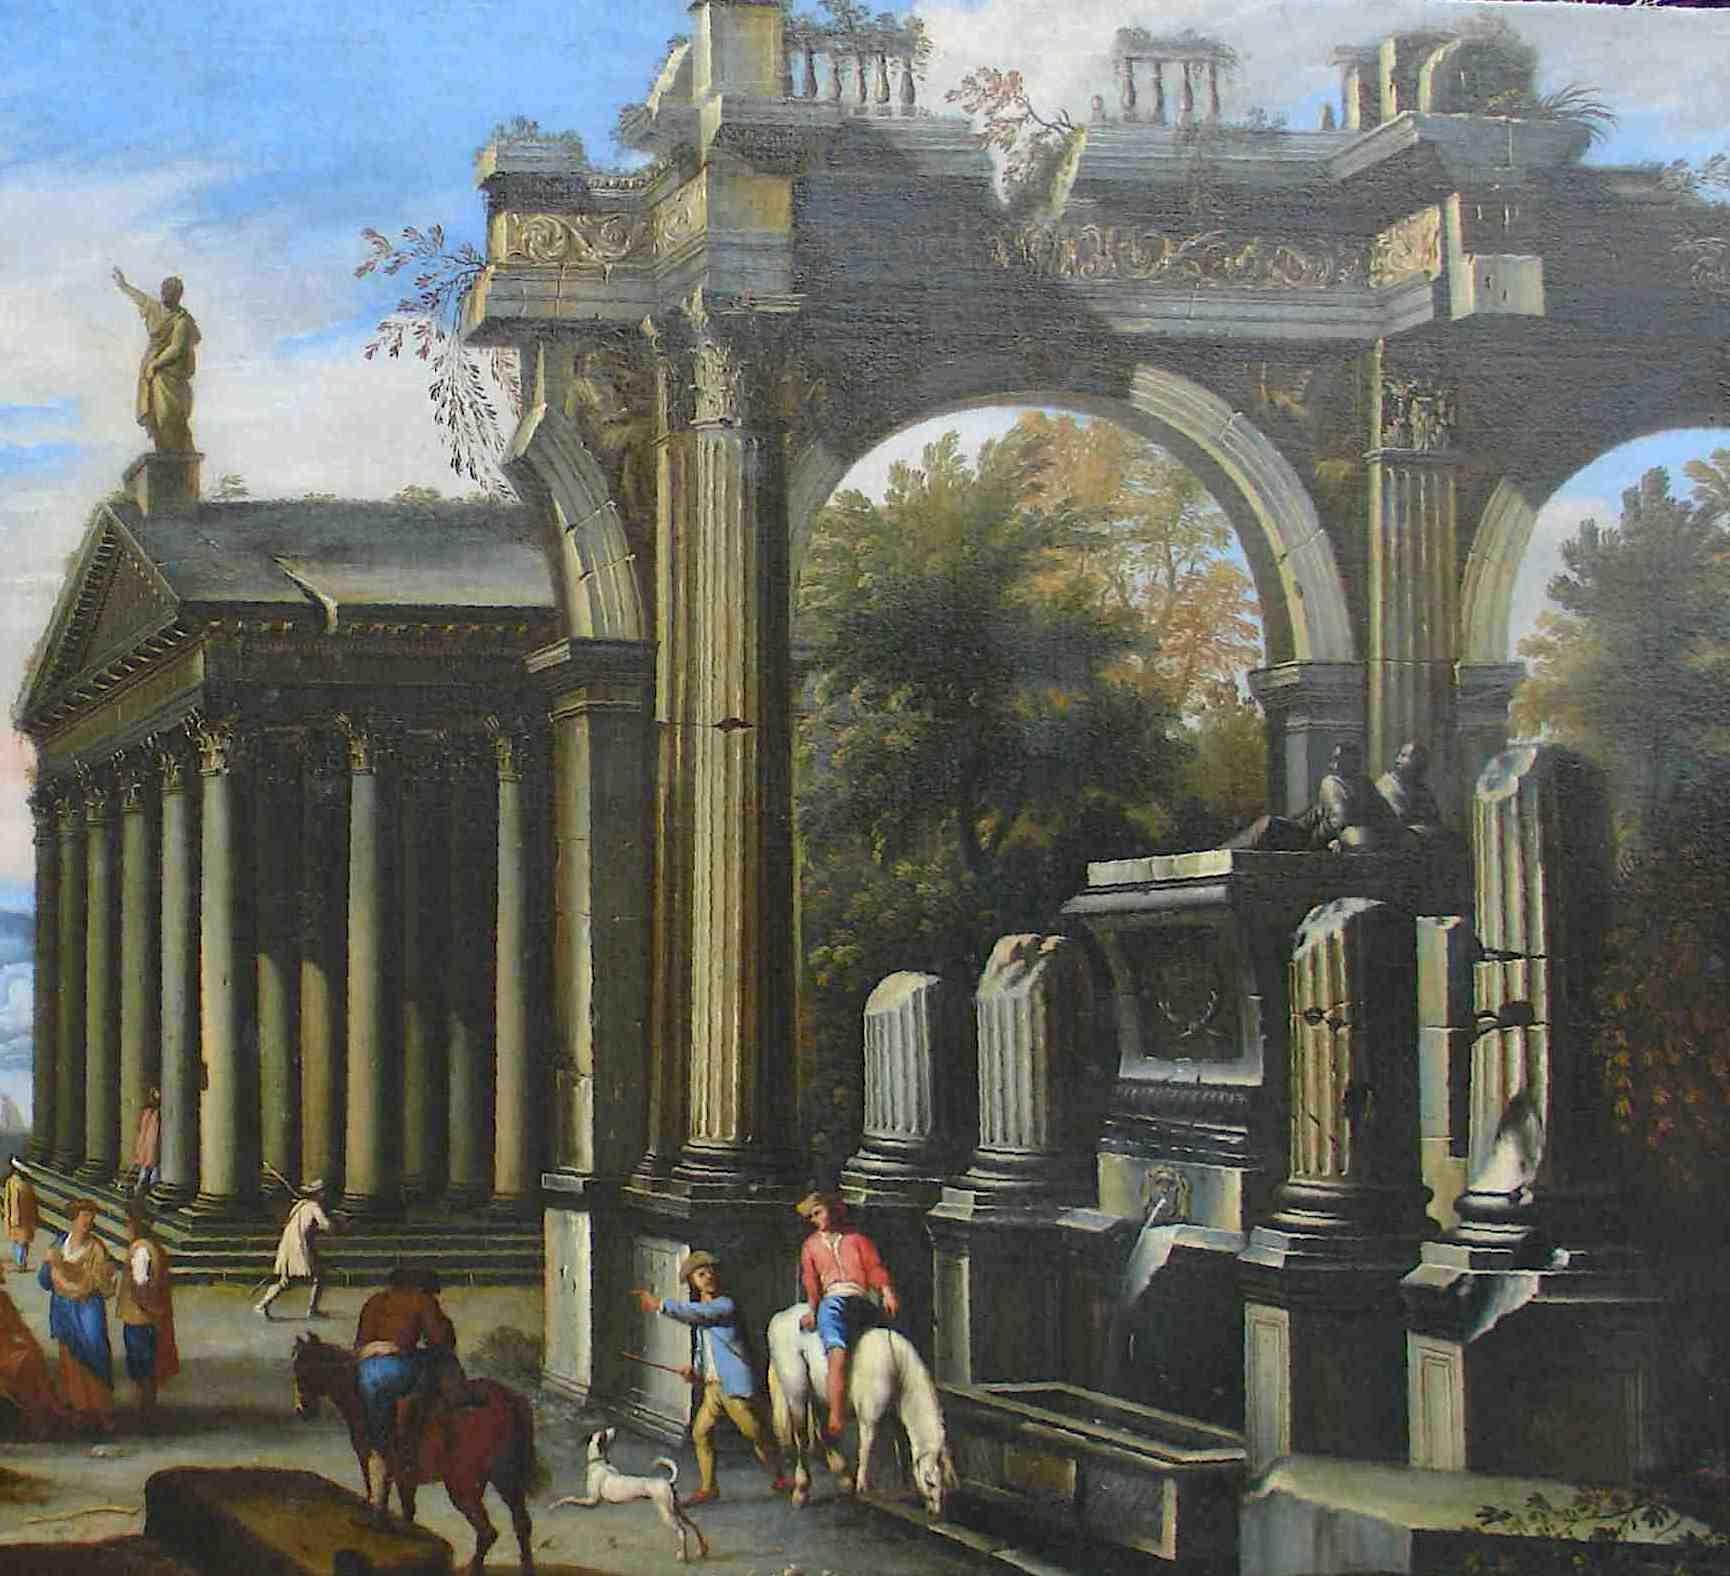 Capriccio - 17th Century Oil on Canvas Classical Architectural Ruins Painting  10